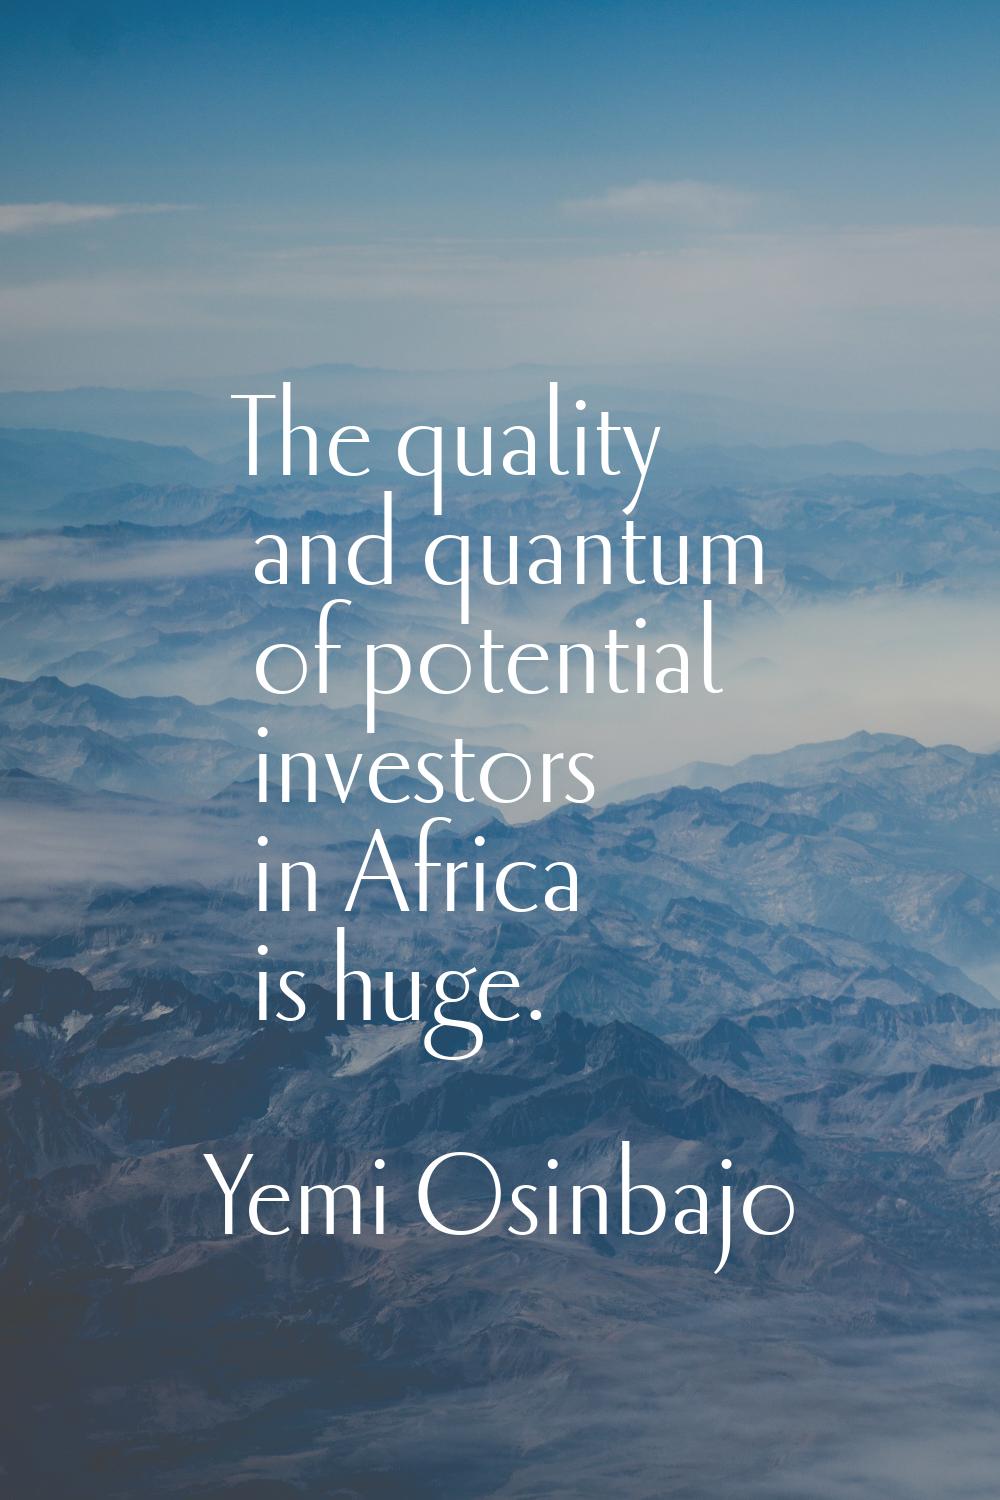 The quality and quantum of potential investors in Africa is huge.